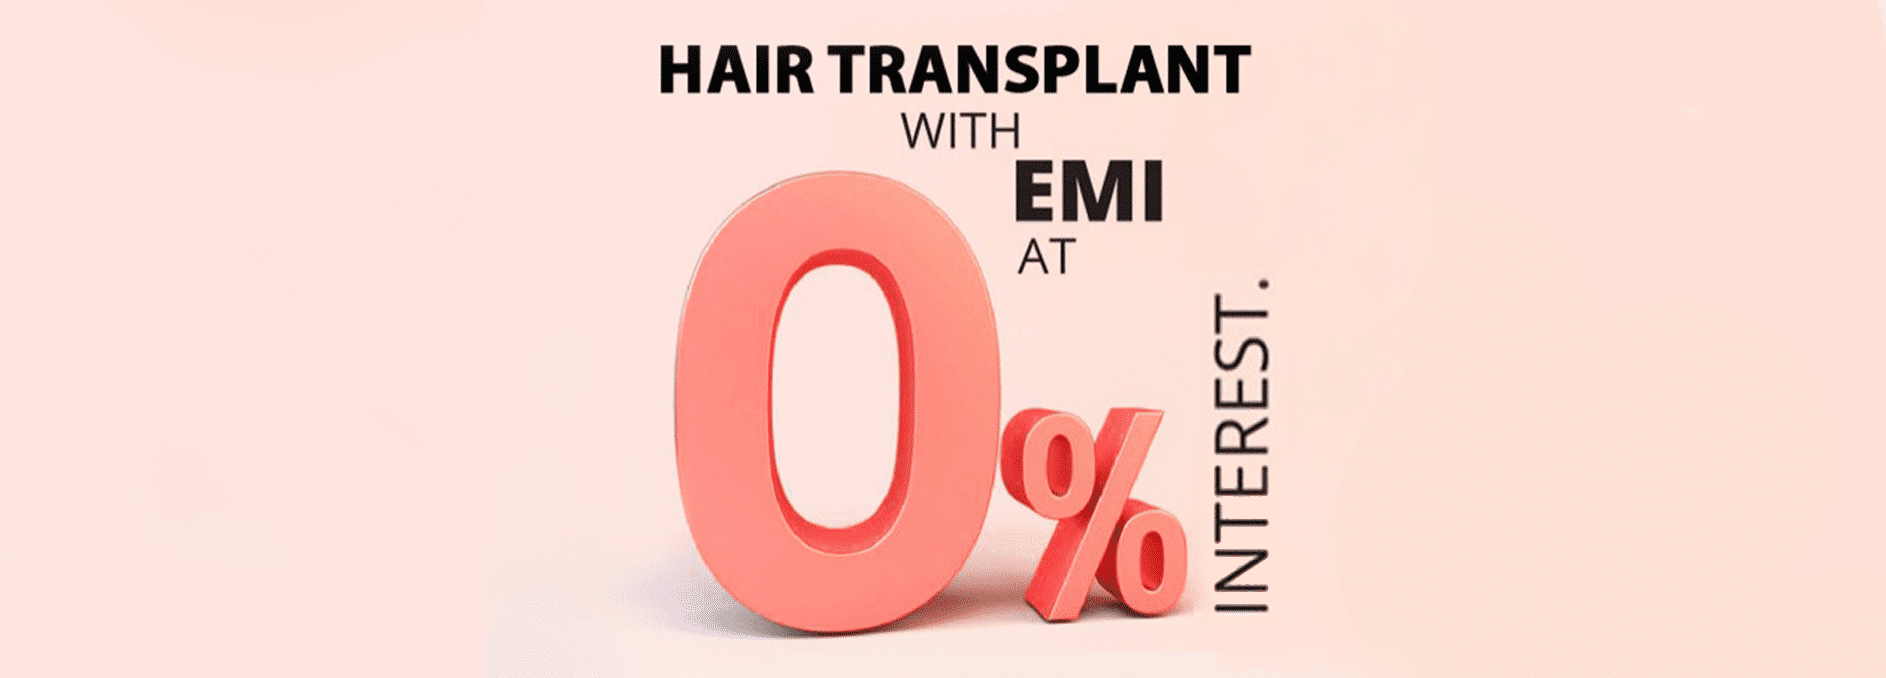 Loan for Hair Transplant in India | ClinicSpots